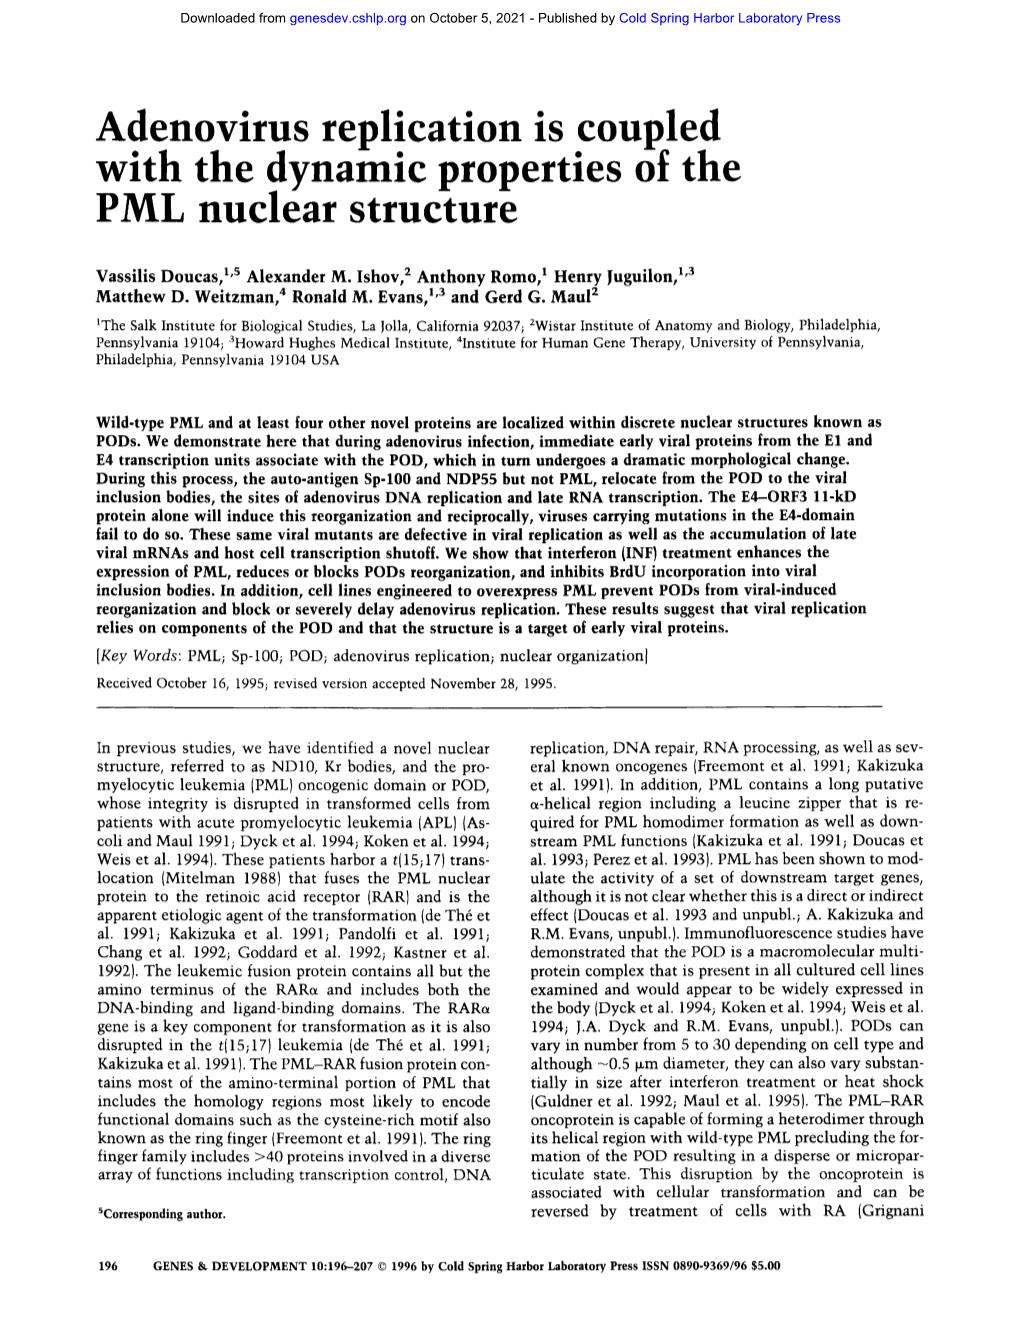 Adenovirus Replication Is Coupltd E with the Dynamic Propernes of PML Nuclear Structure